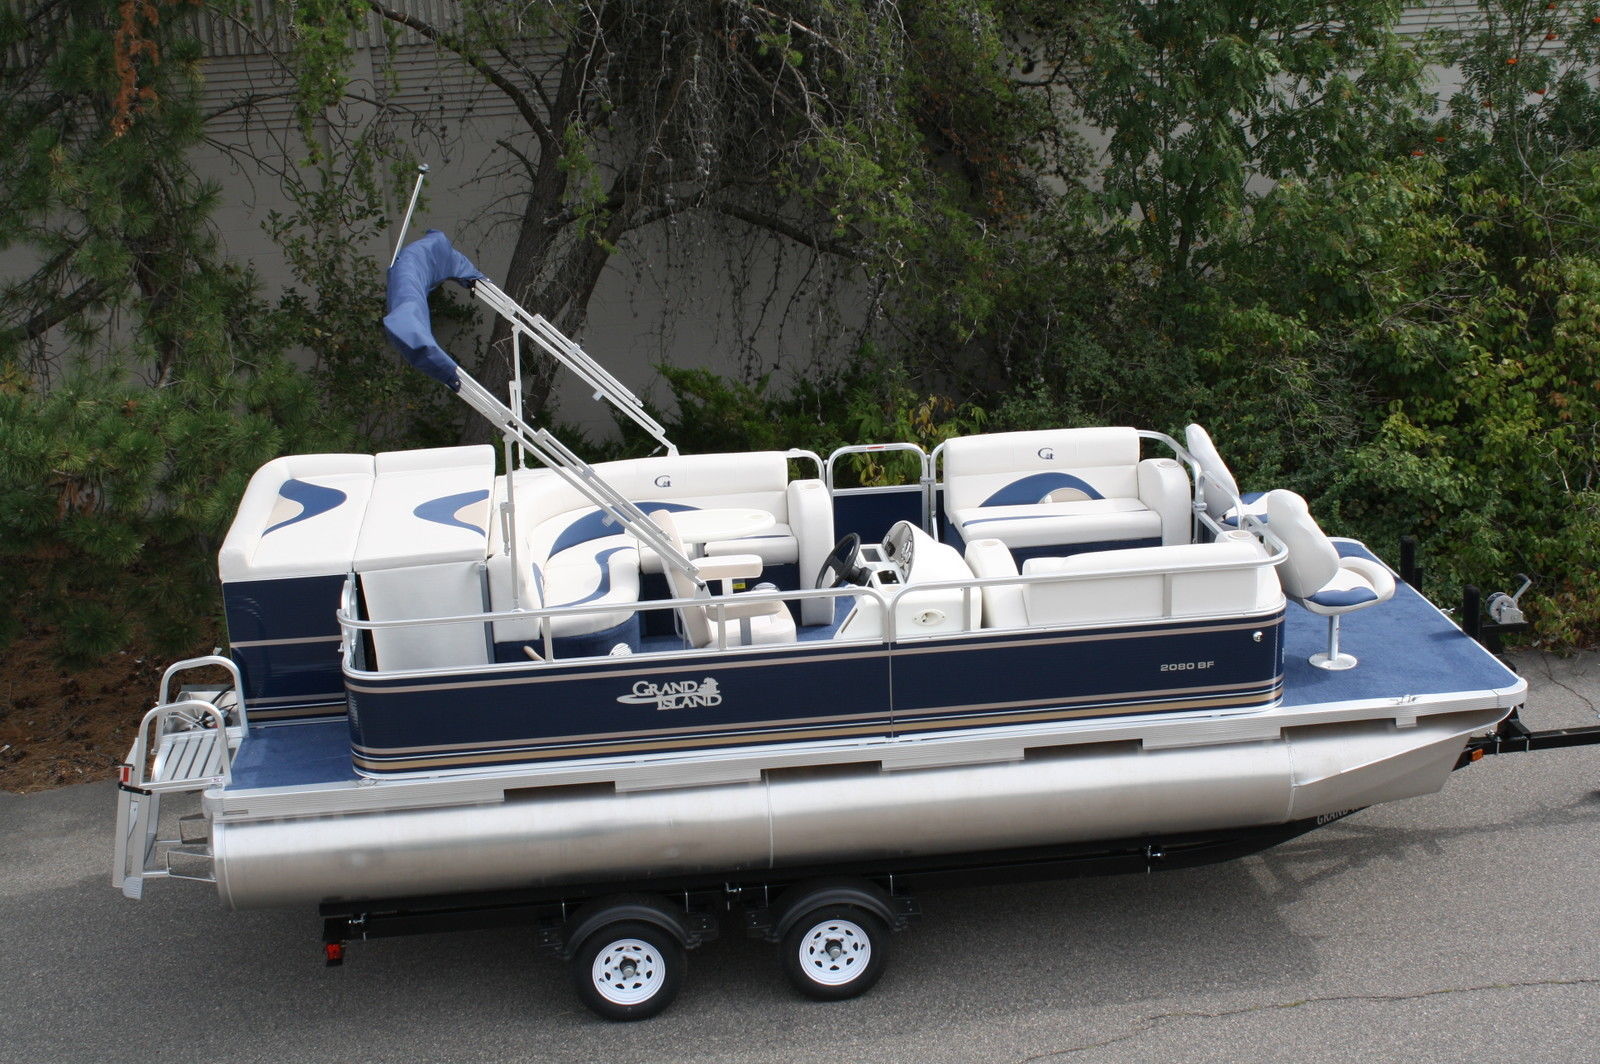 Grand Island 20 Cruise 2014 for sale for $10,999 - Boats ...